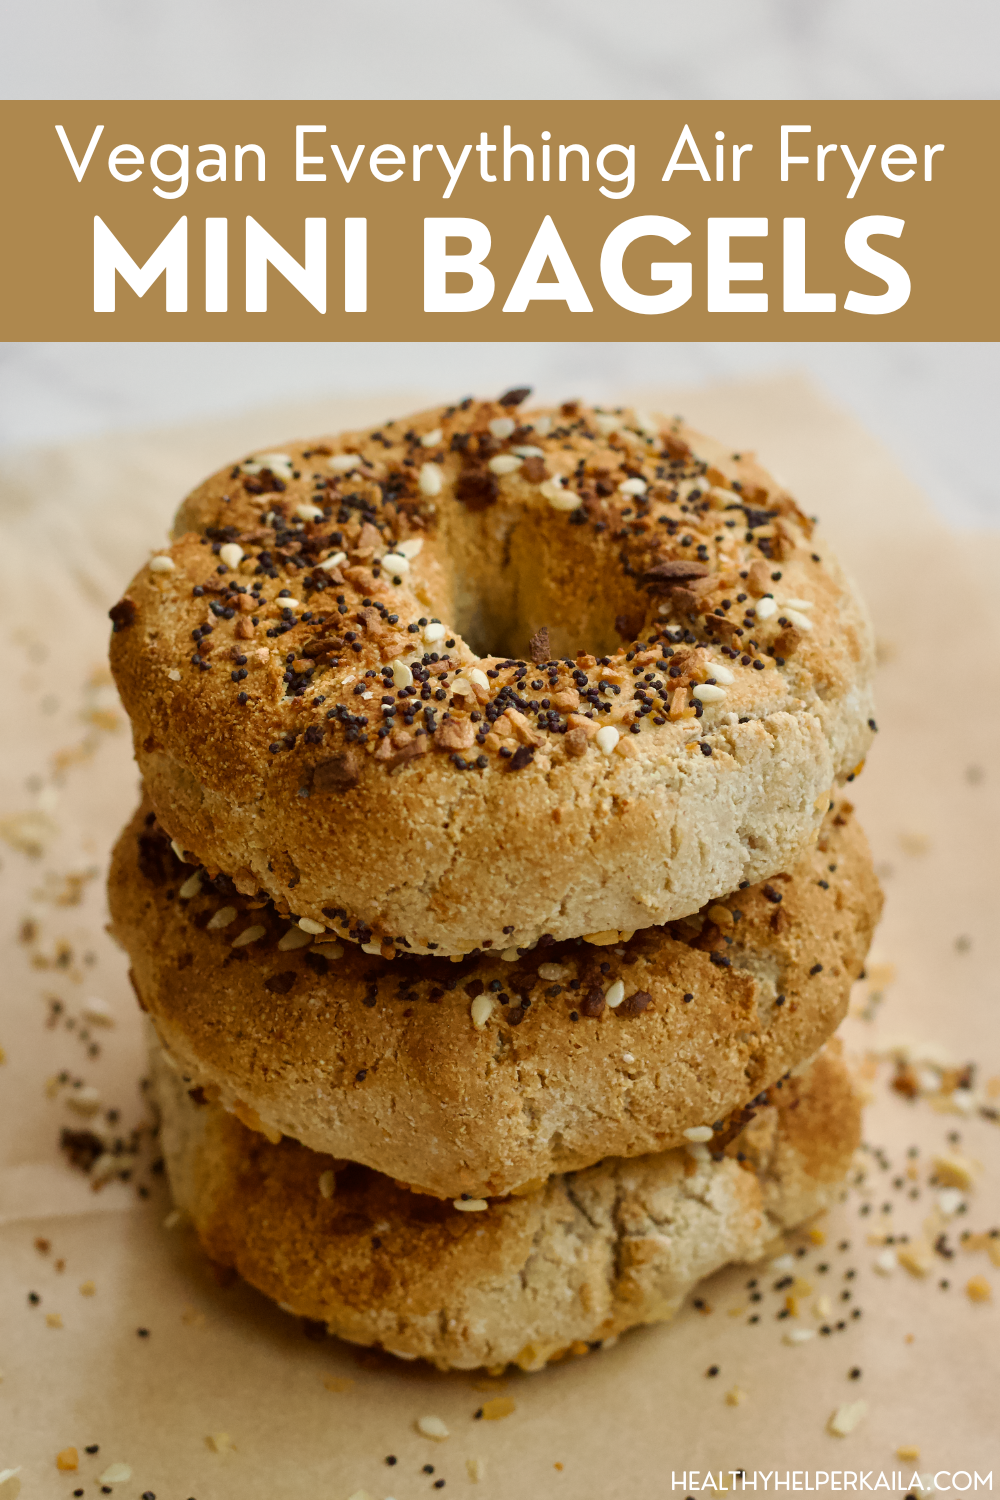 Your favorite salty n' savory Everything bagels gone vegan and gluten-free! Made in the Air Fryer, these healthy, whole-grain bagels are low-fat, high-protein, oil-free, and require no boiling/baking. Easy to make and SO delicious with your favorite vegan cream cheese spread.